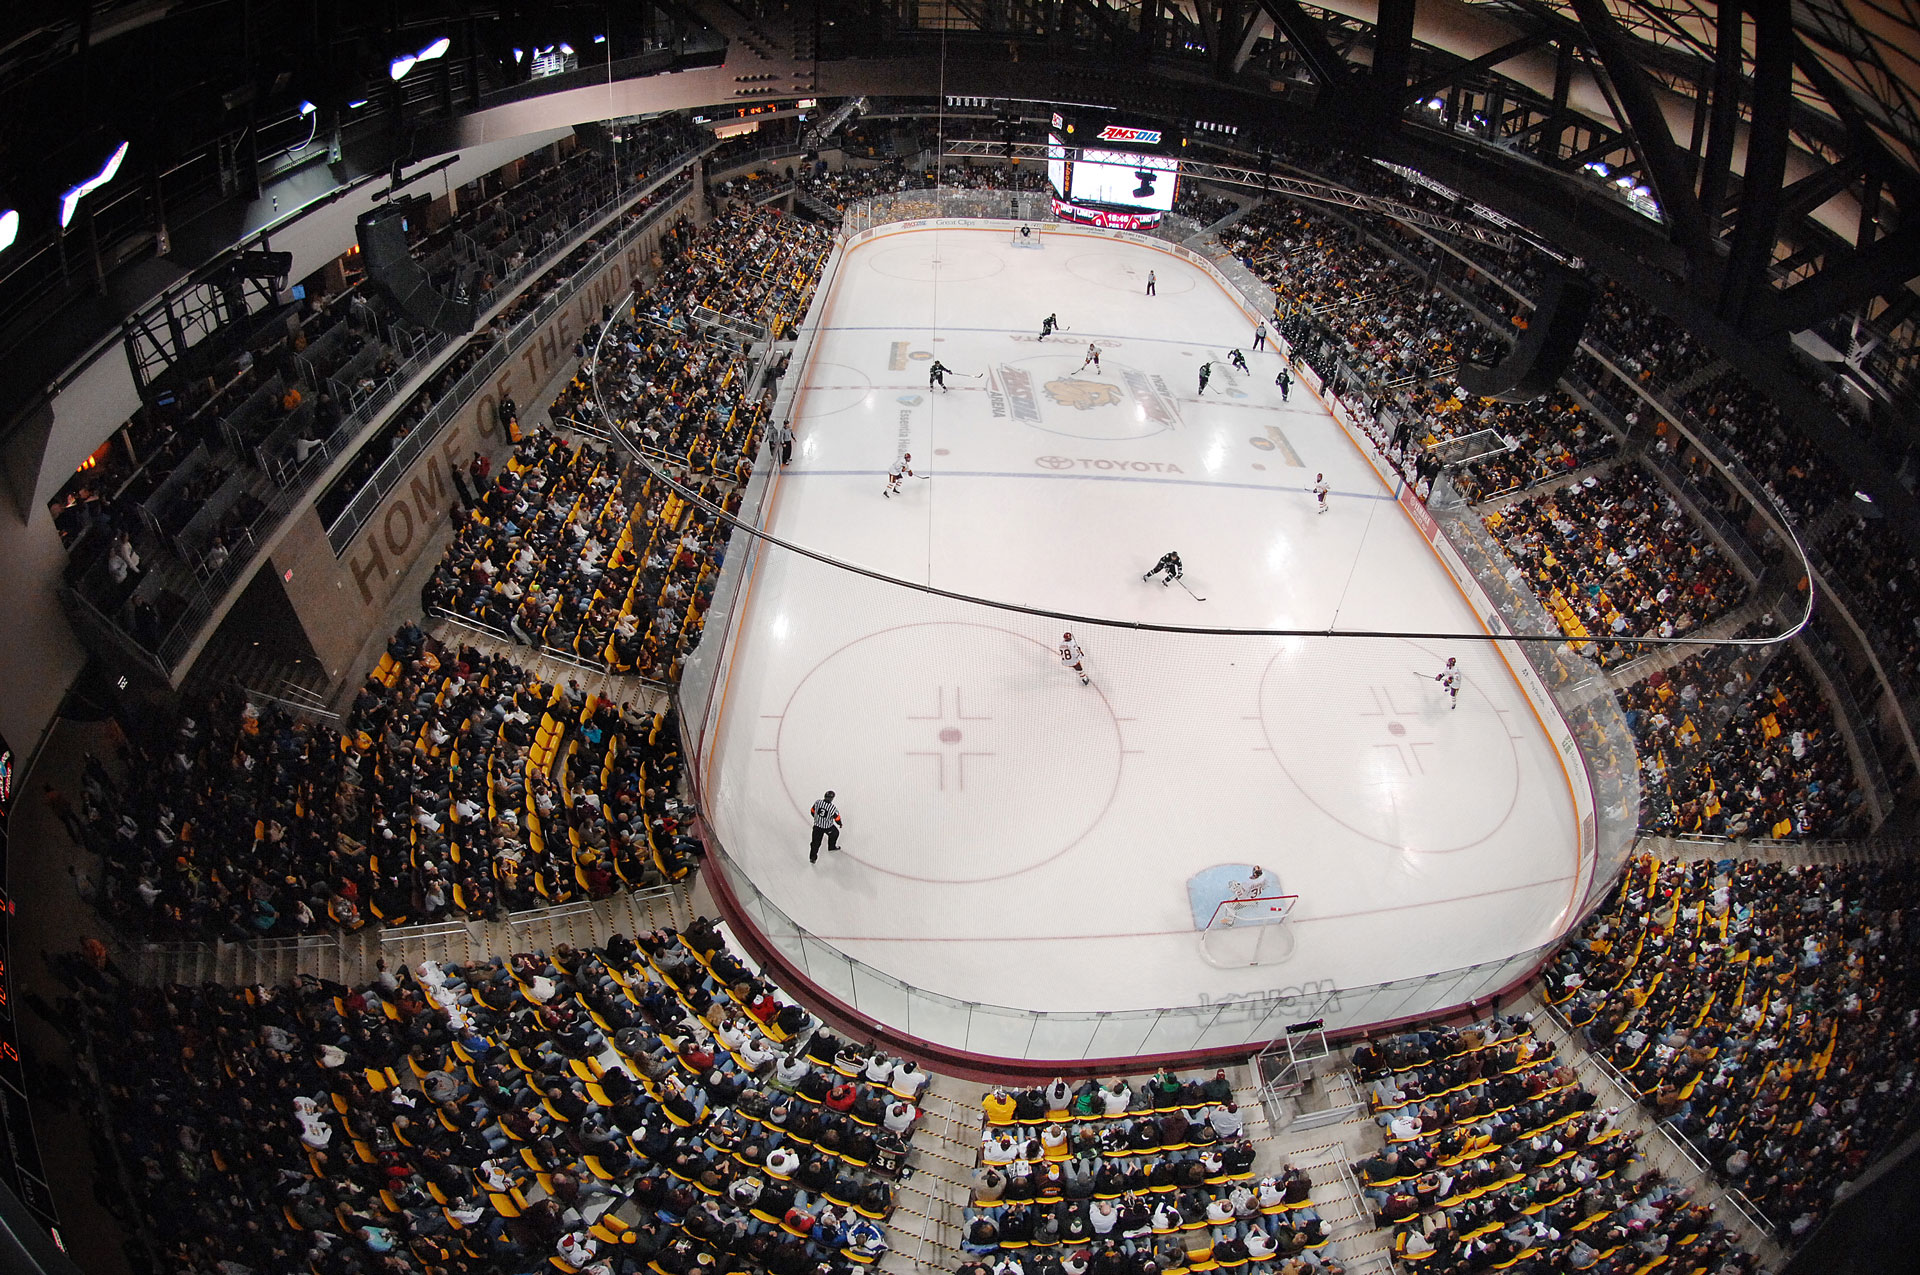 Looking down on the hockey ice from the ceiling of the Amsoil Arena. Hockey game below.